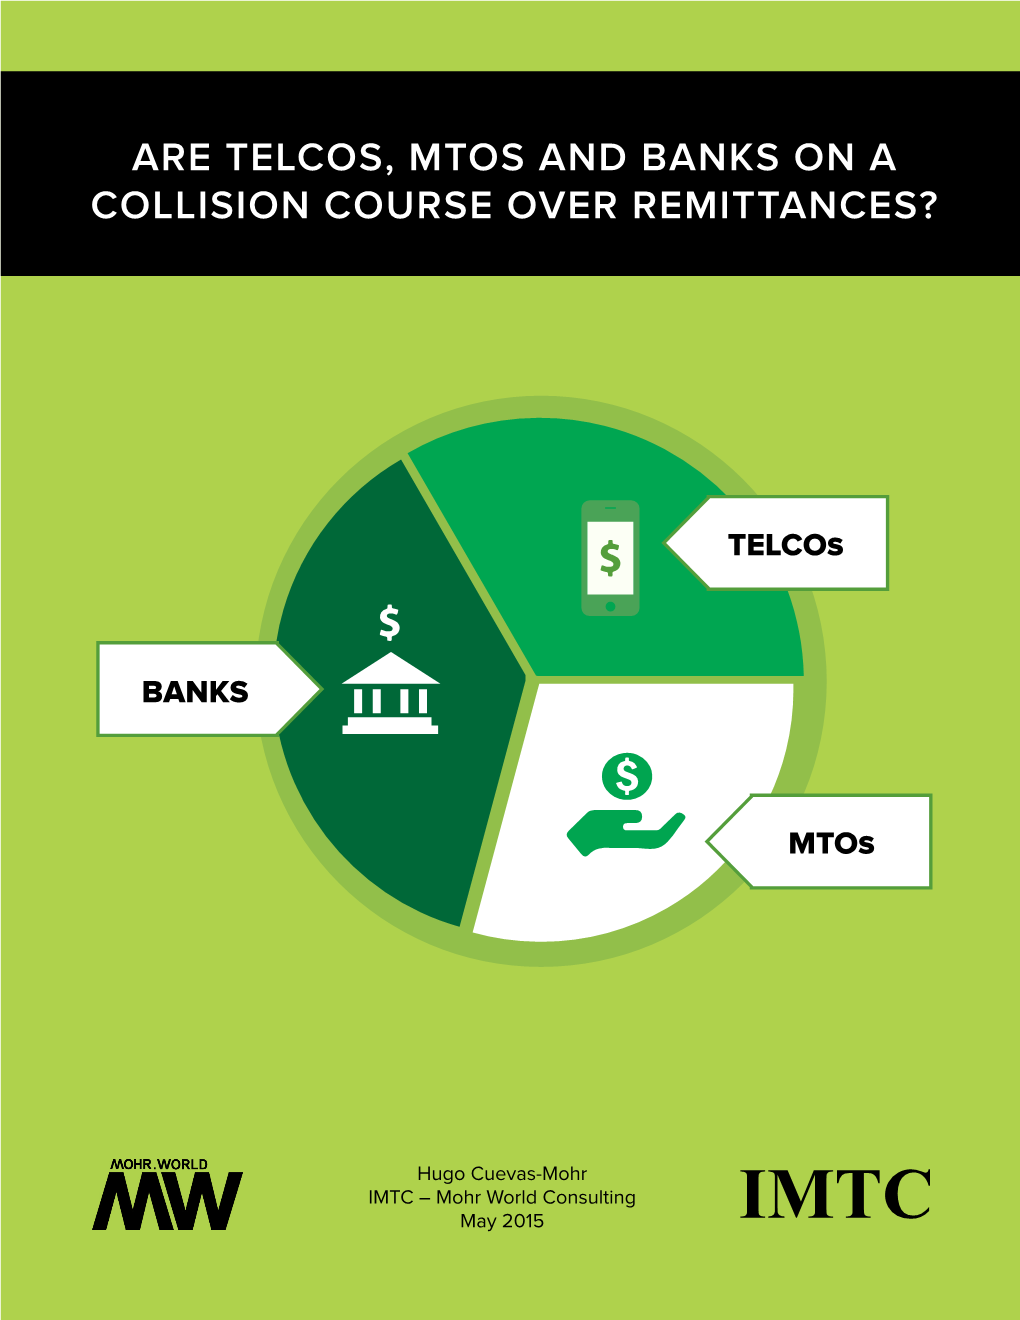 Mtos, Telcos, Banks: on a Collision Course Over Remittances?